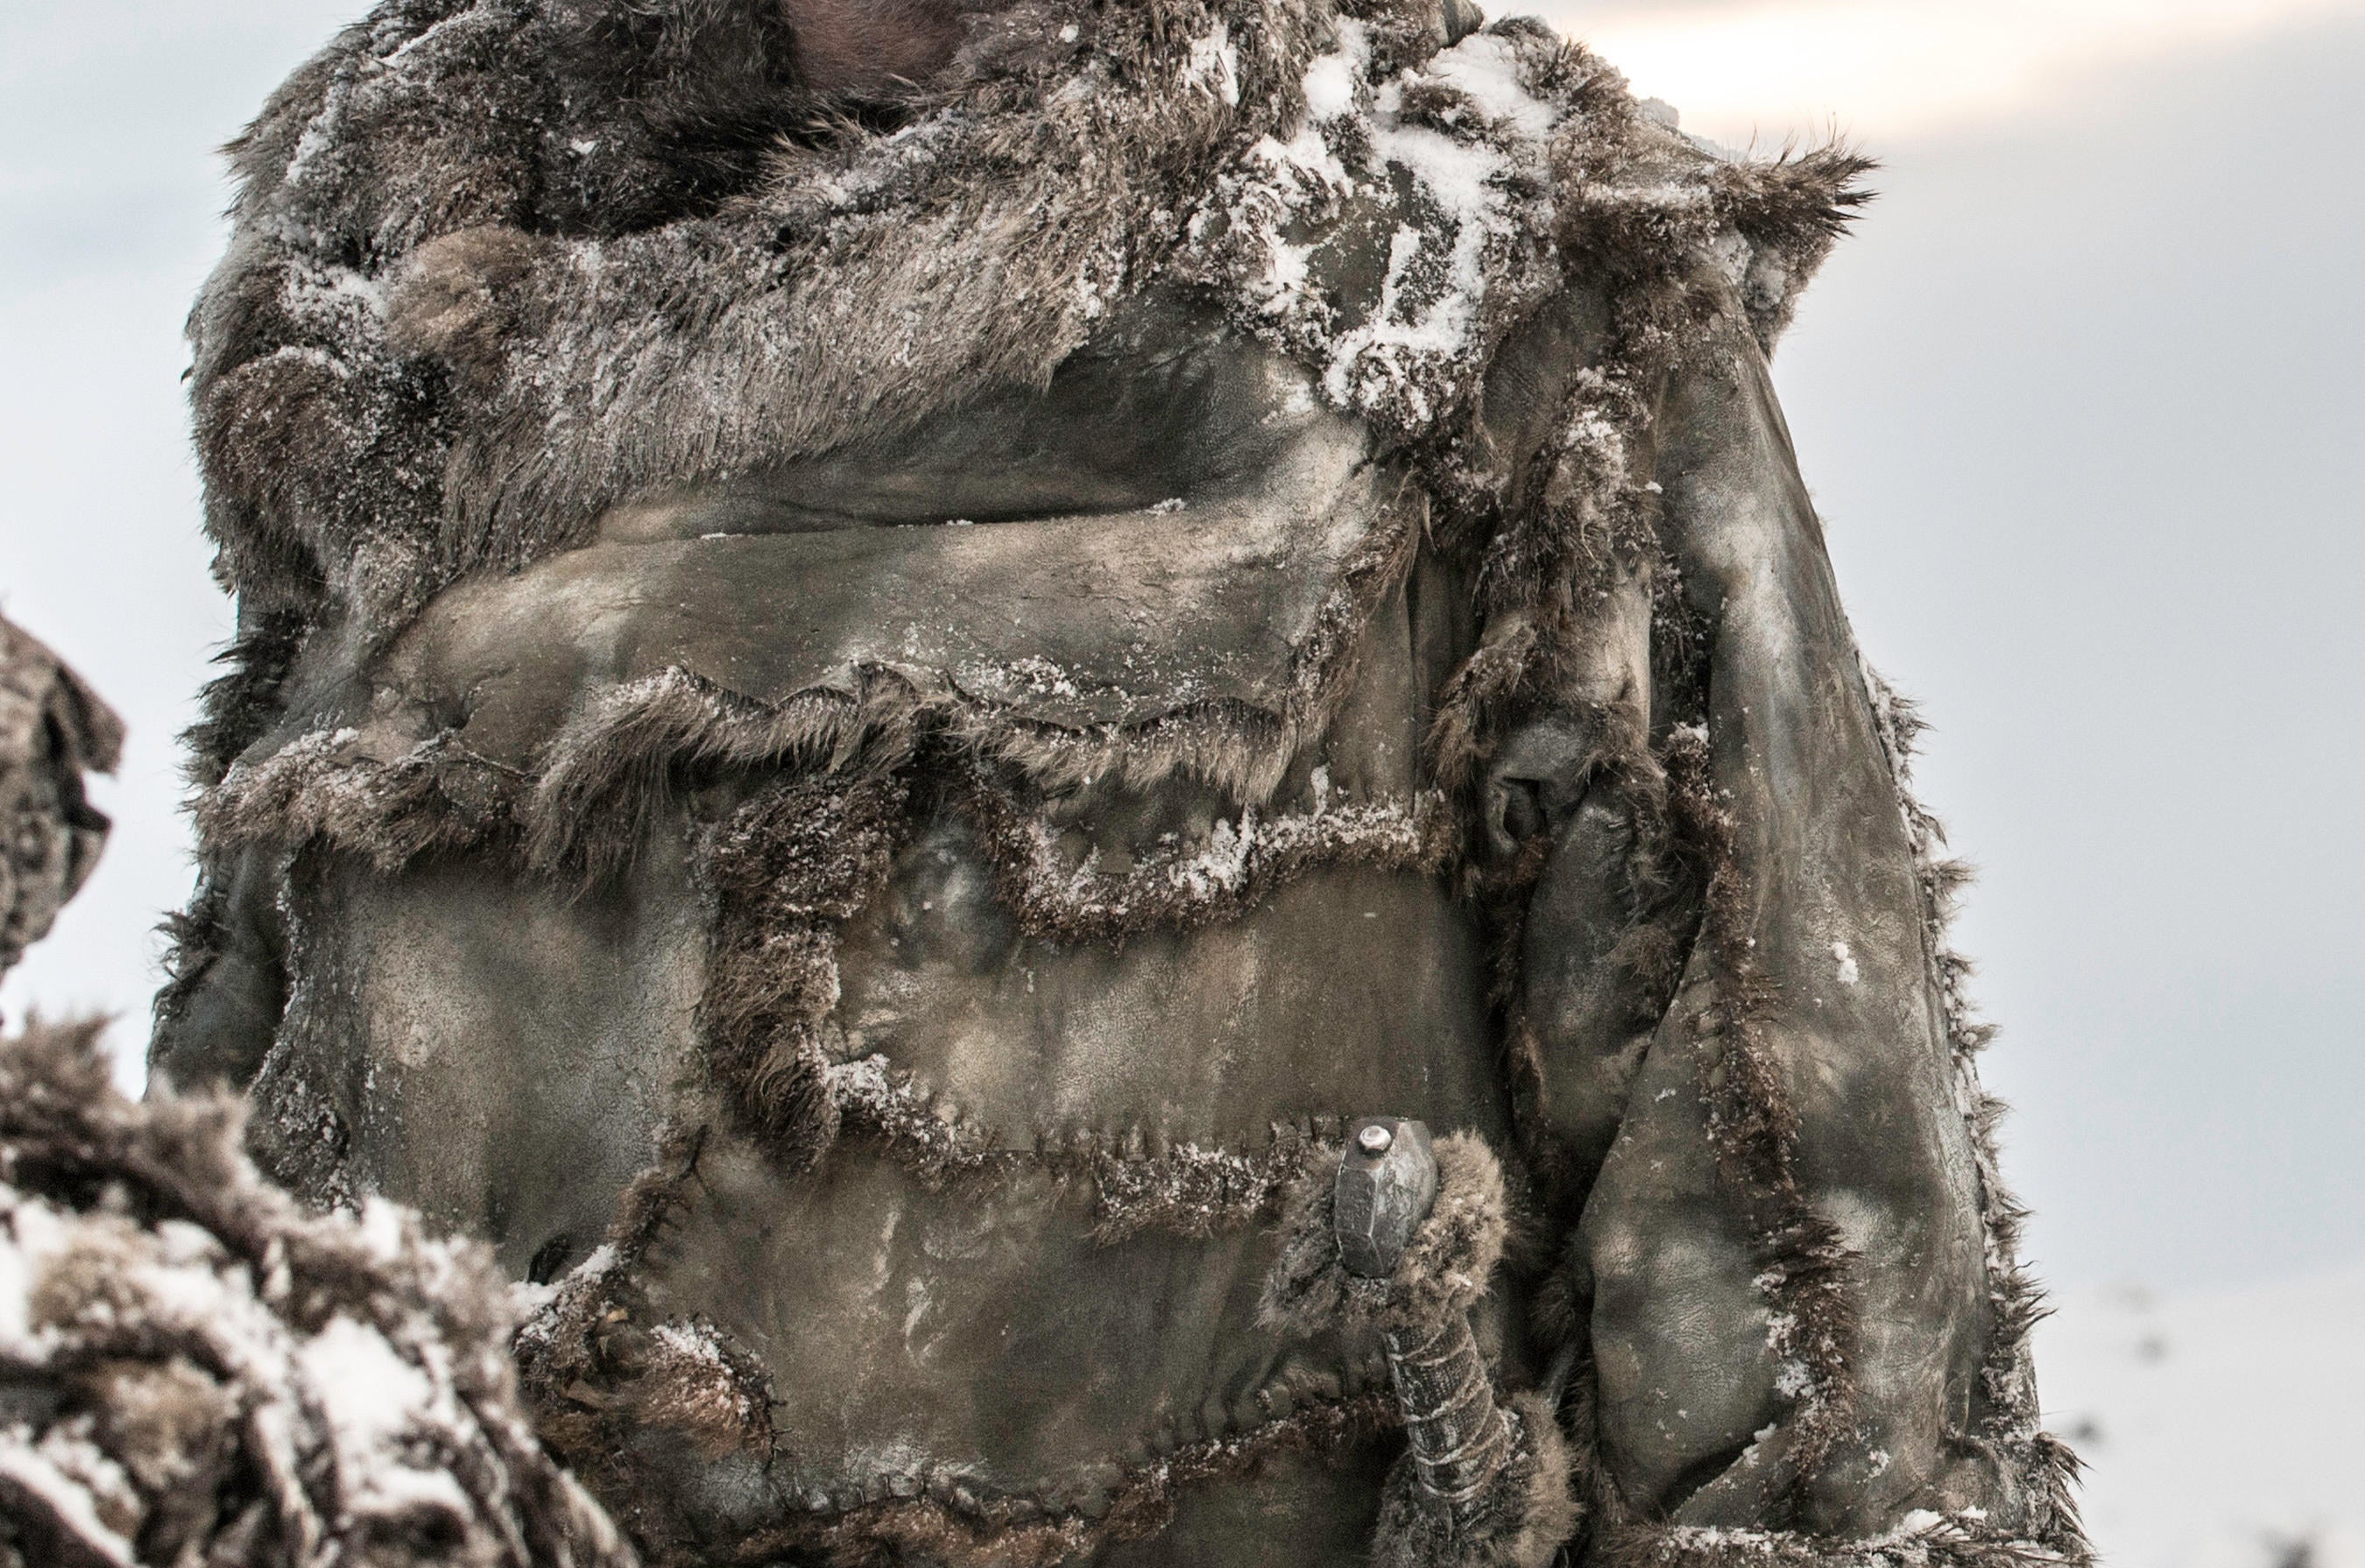 A man wearing a coat assembled from fur pelts observes a situation in a frozen tundra.